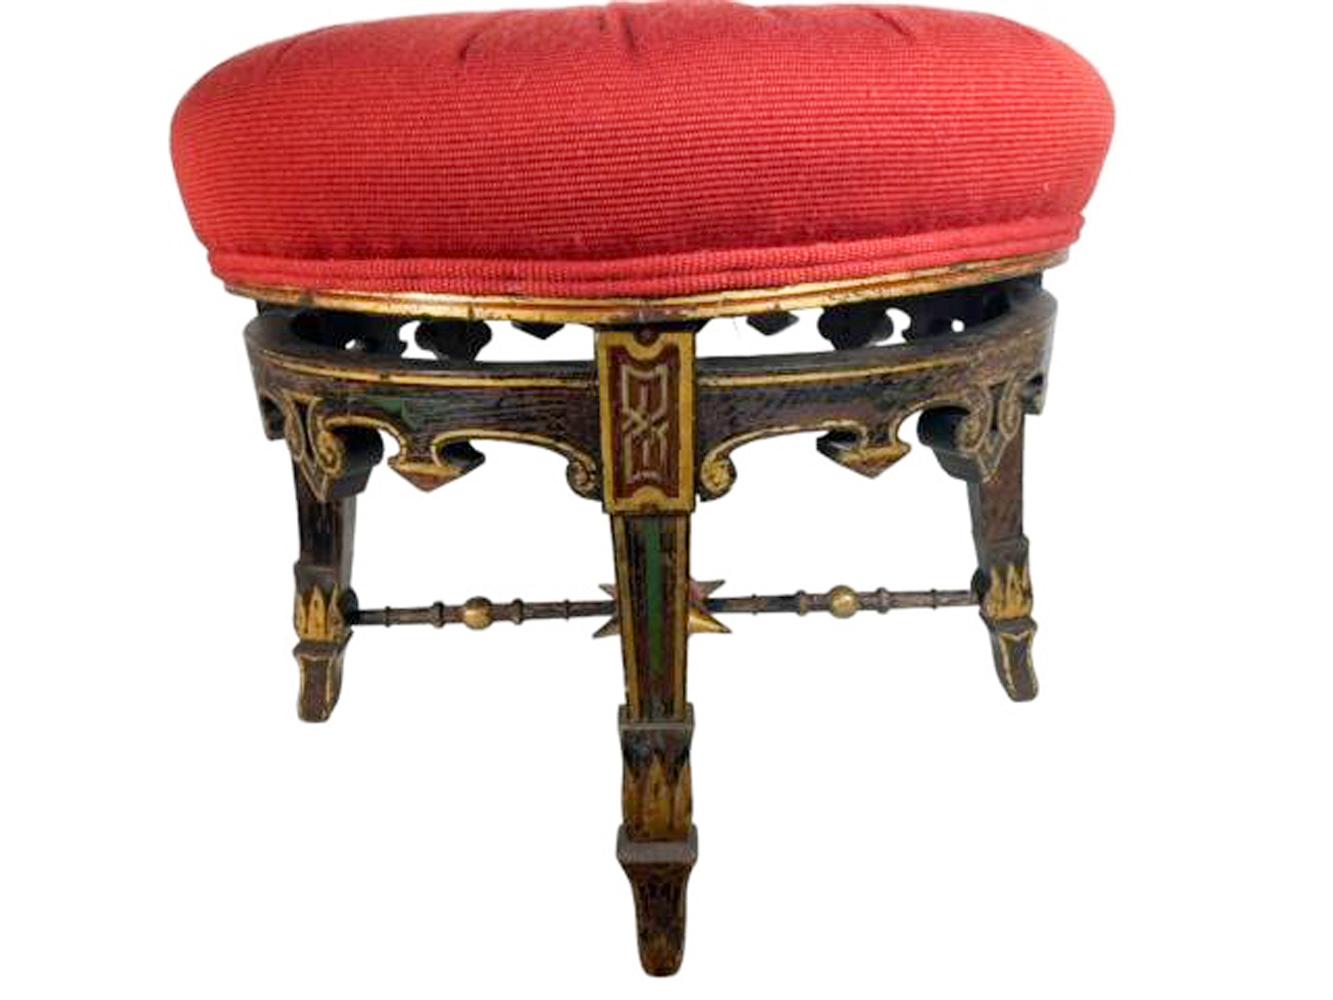 American Aesthetic Movement footstool on four tapered legs below a shaped and pierced apron, the legs connected with ball and ring turned x-stretcher centering a large red sphere with gilded spikes. The original faux rosewood painted wood frame with